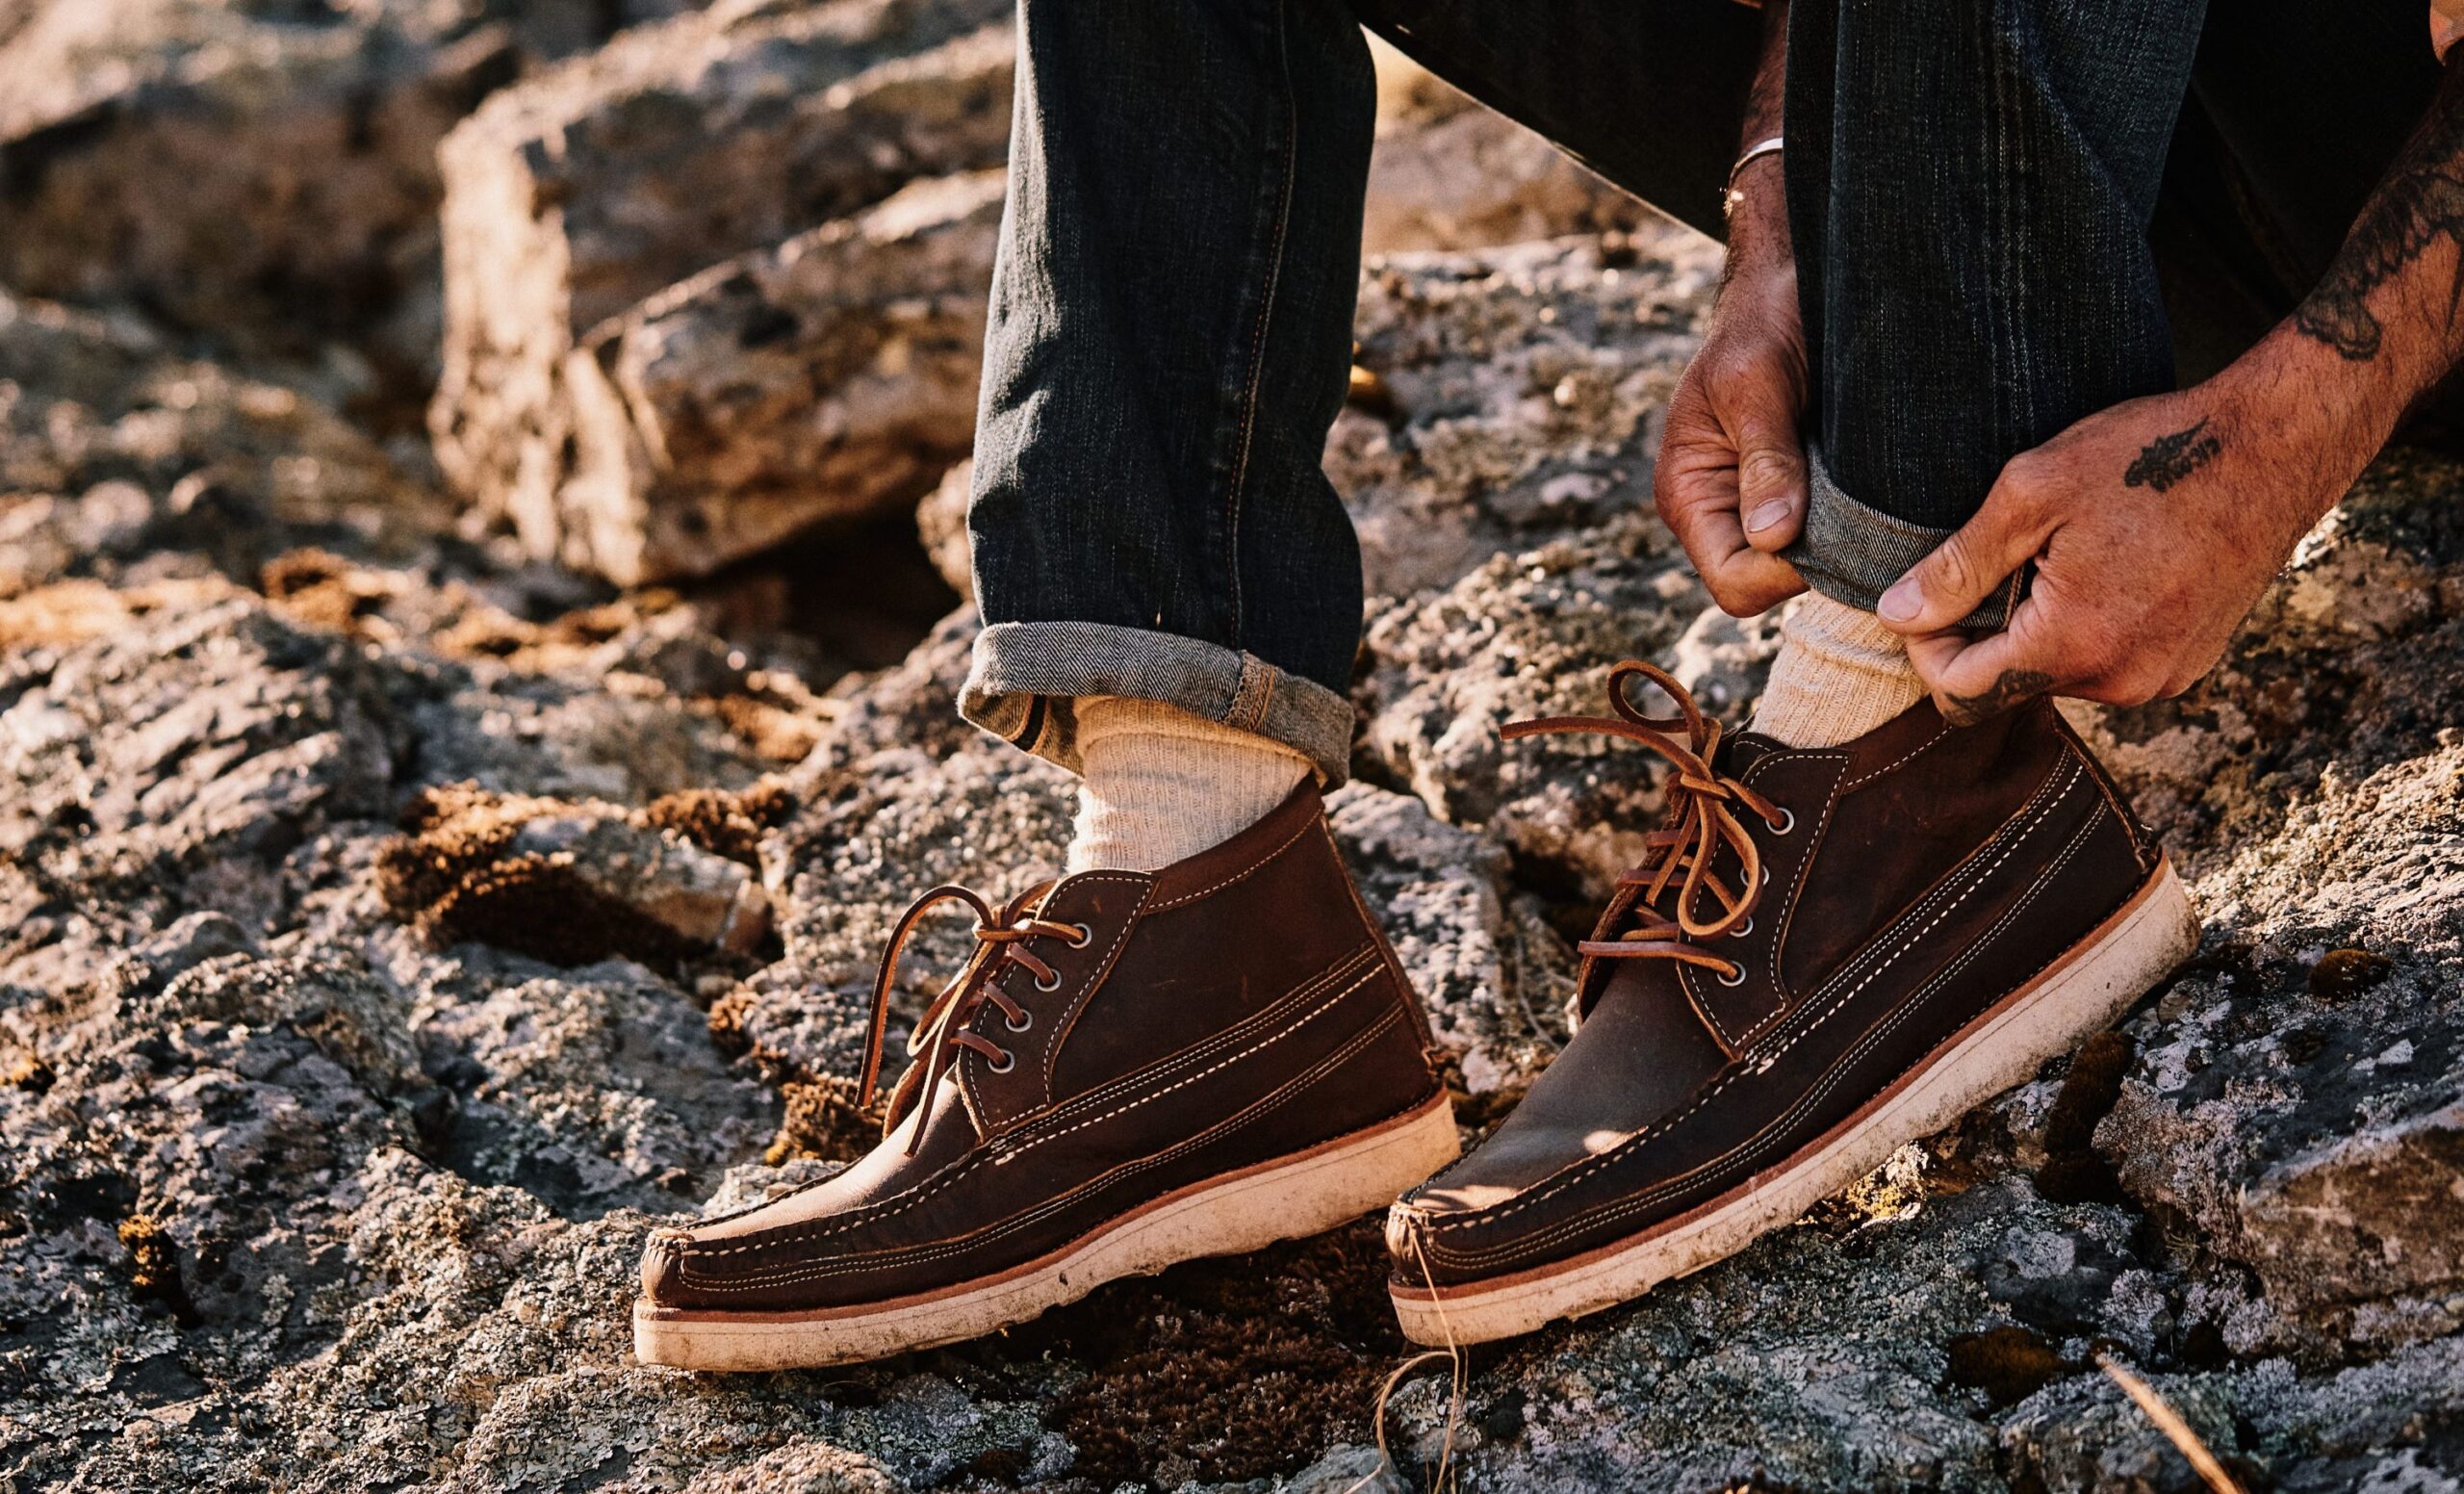 Huckberry x Easymoc Scout Boot